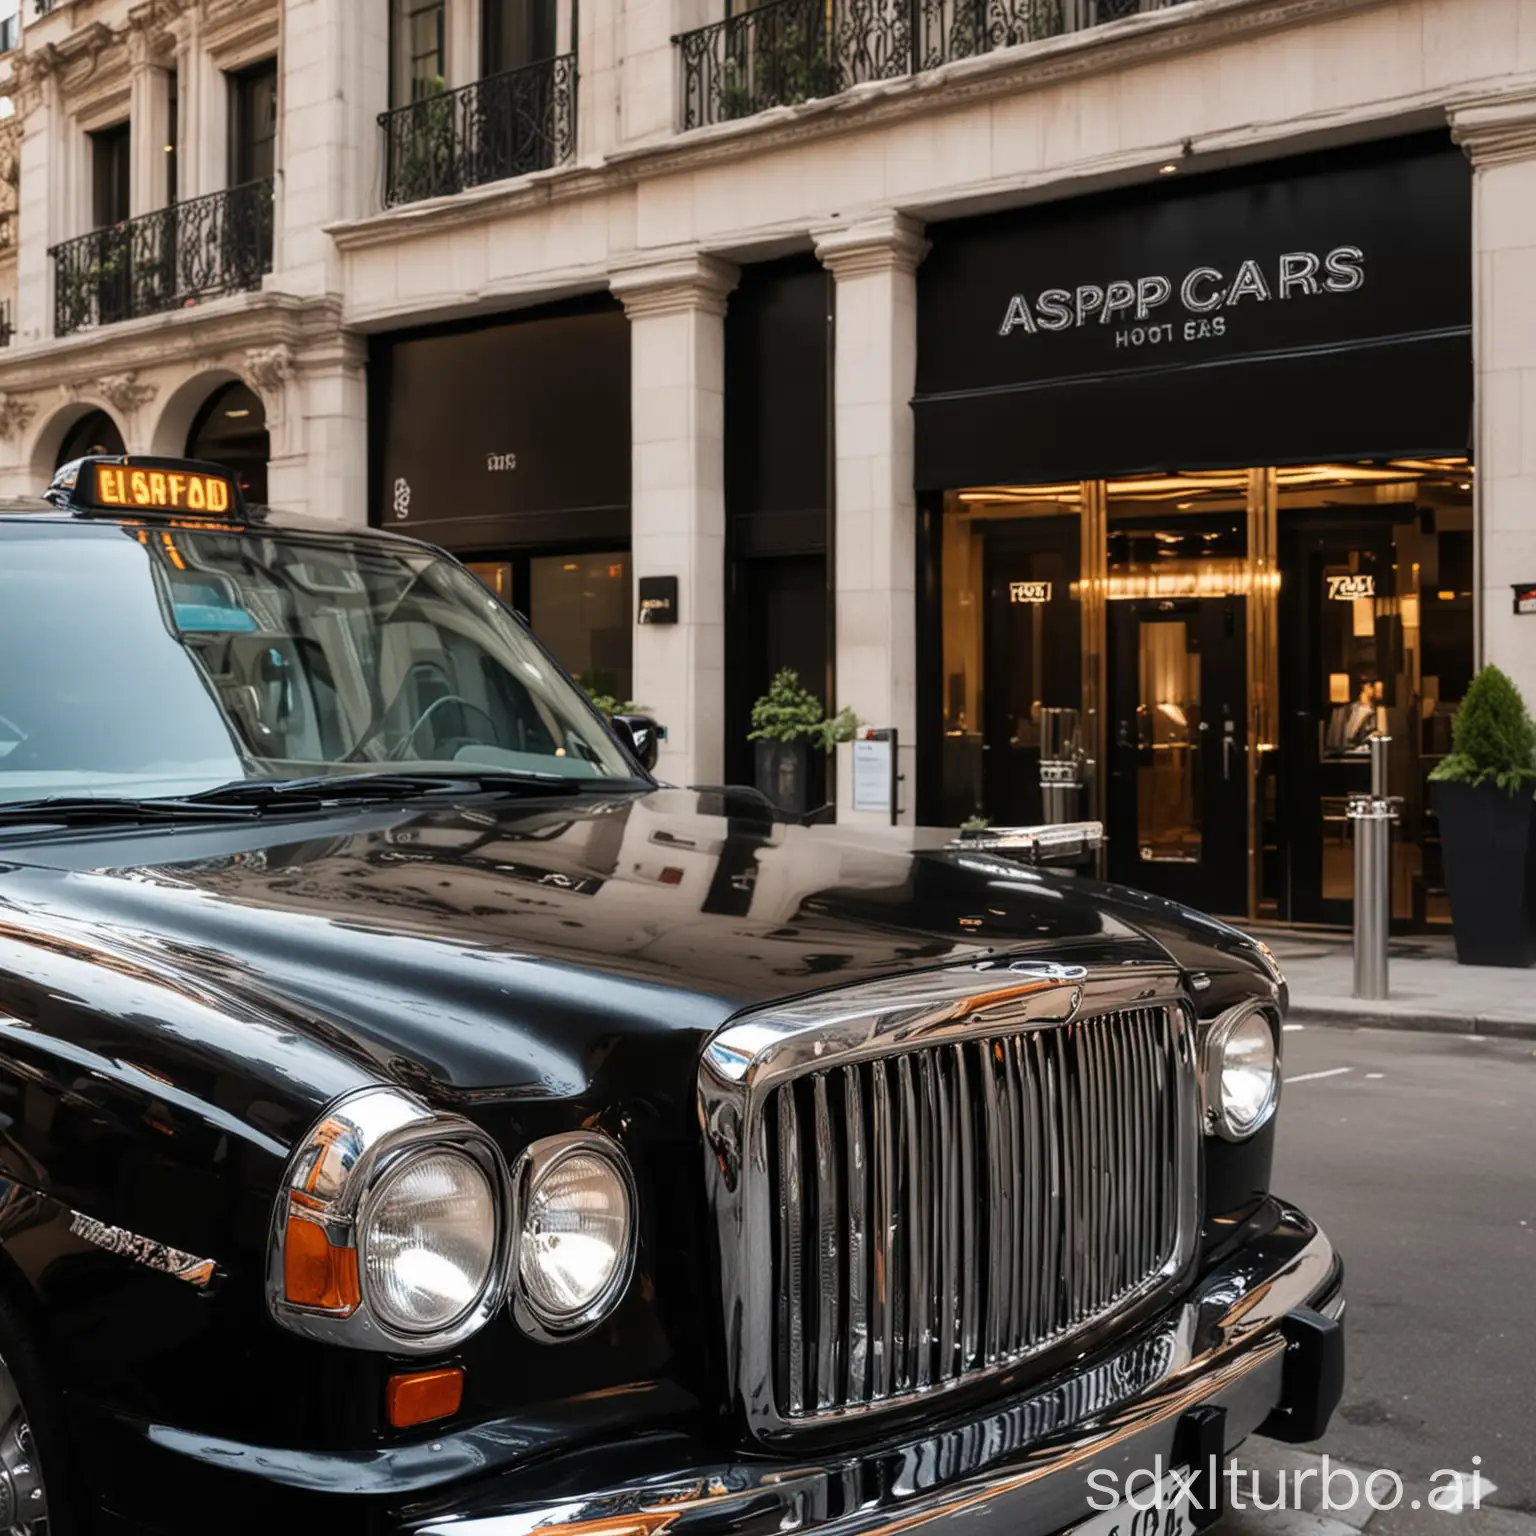 A black taxi cab is parked in front of a luxurious hotel. The taxi is clean and well-maintained, with a shiny black paint job and polished chrome accents. A sign that says ASAP CARS is resting on the hood of the taxi.